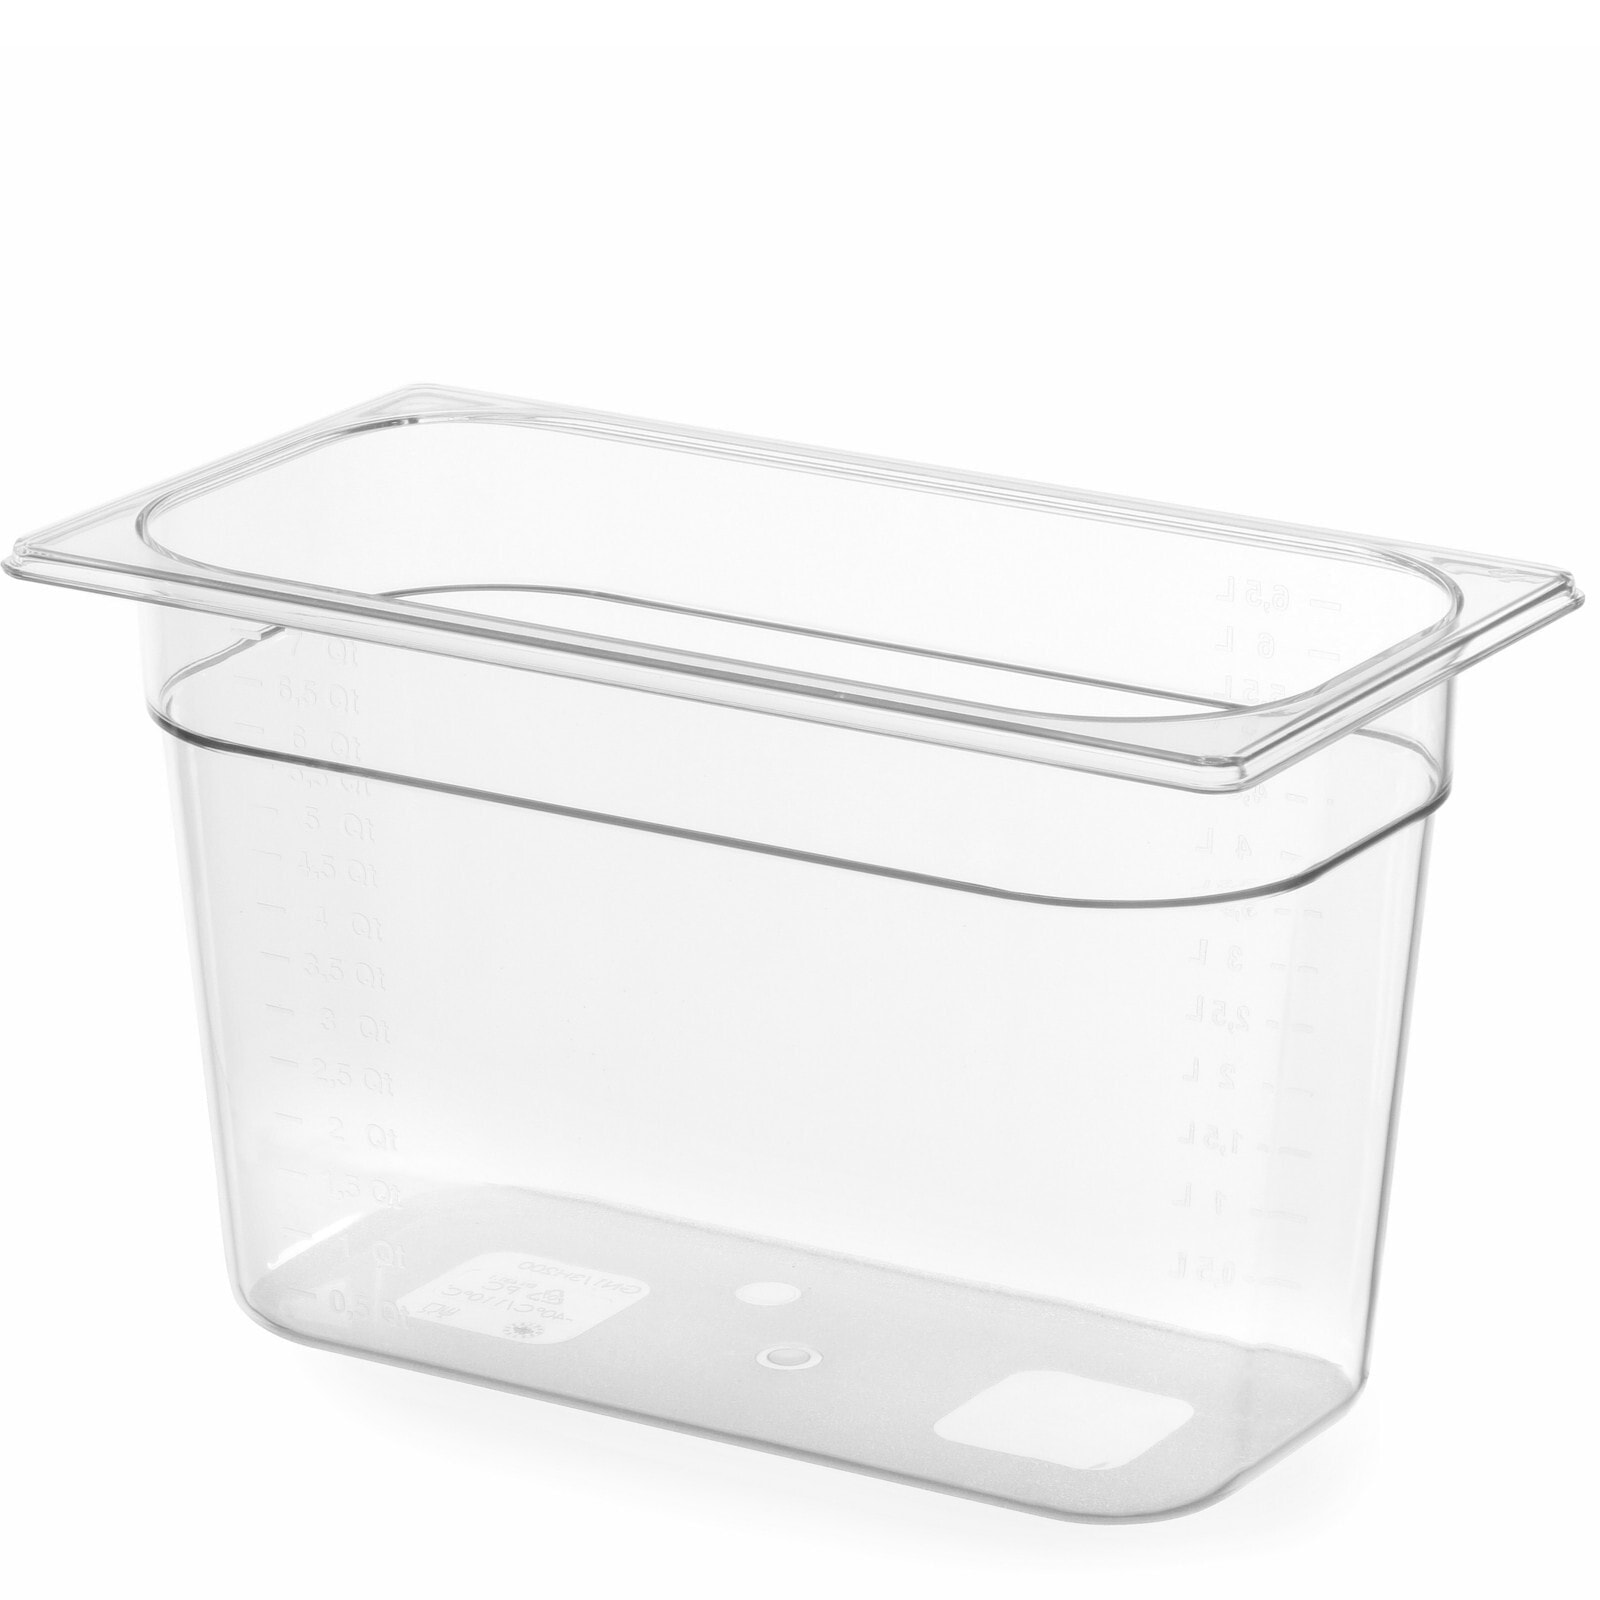 GN container transparent, polycarbonate GN 1/3, height 200 mm - Hendi 861509